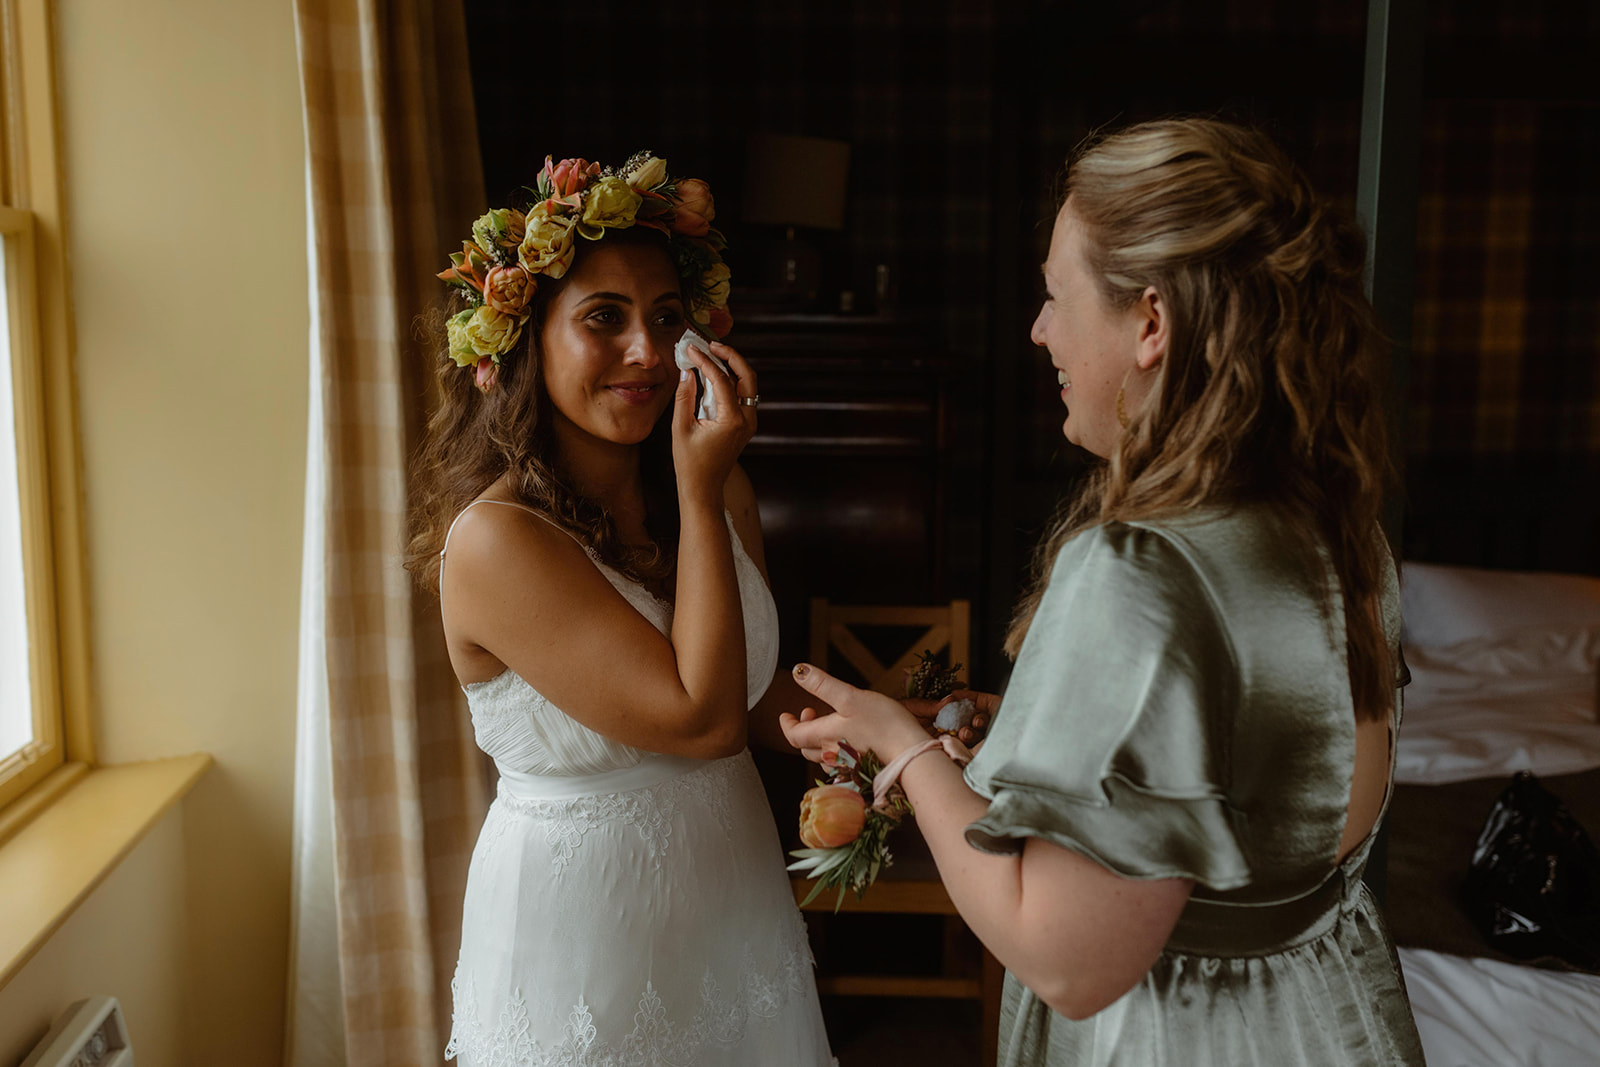 Rebecca and her beautiful flower crown and dress for her Isle of Skye elopement